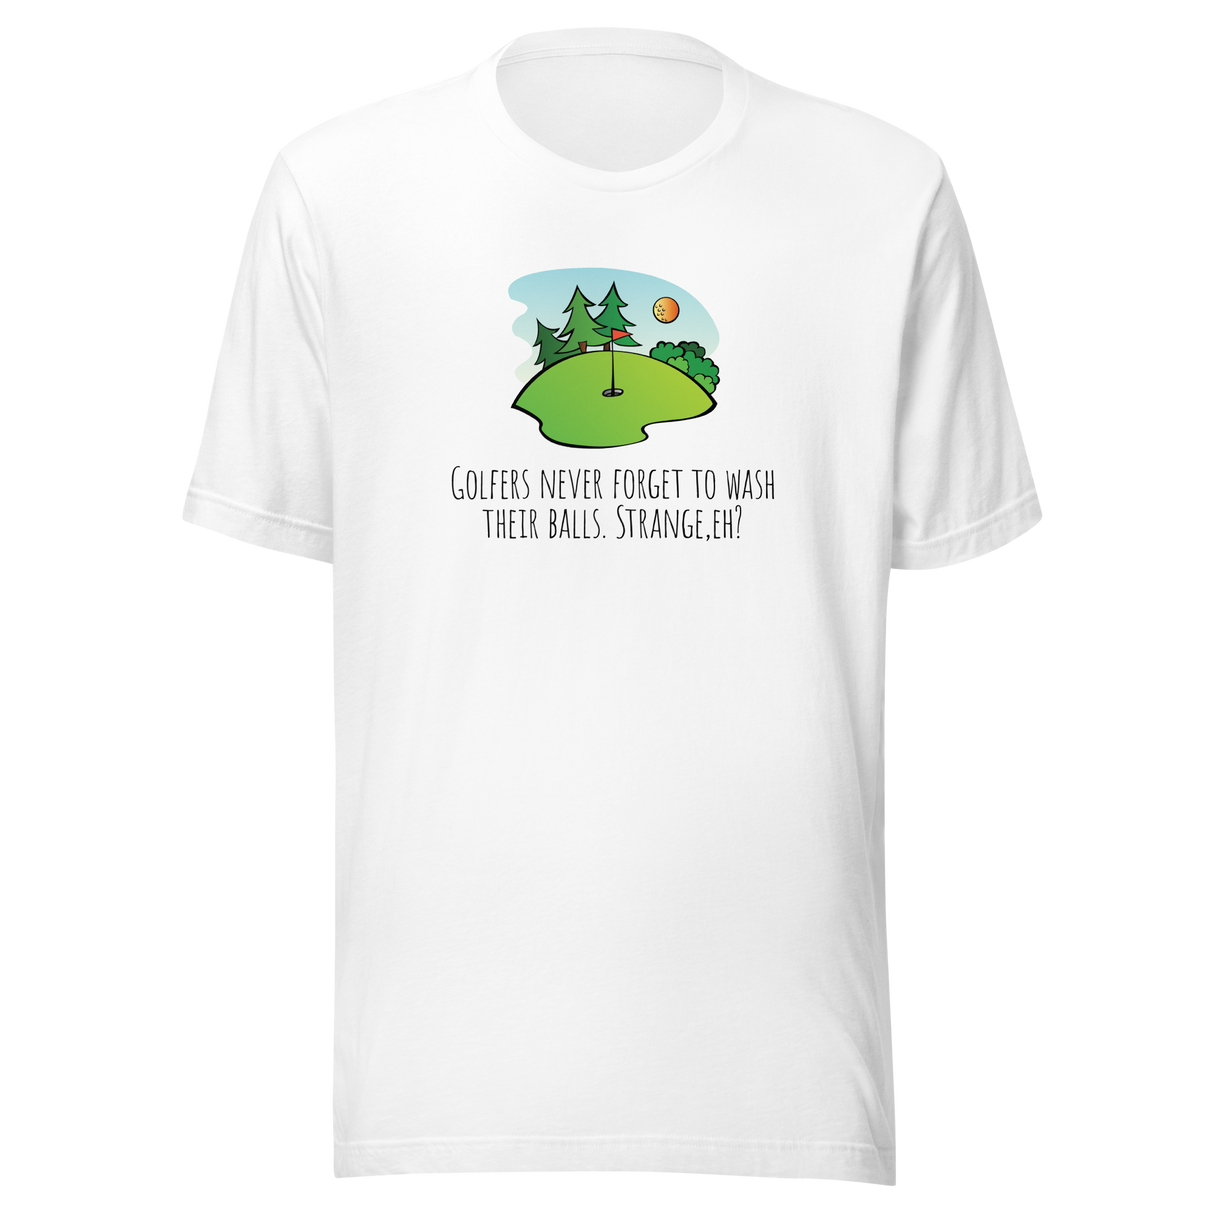 golfers-never-forget-to-wash-their-balls-strange-eh-golf-tee-golfer-t-shirt-golfing-tee-funny-t-shirt-crude-tee#color_white